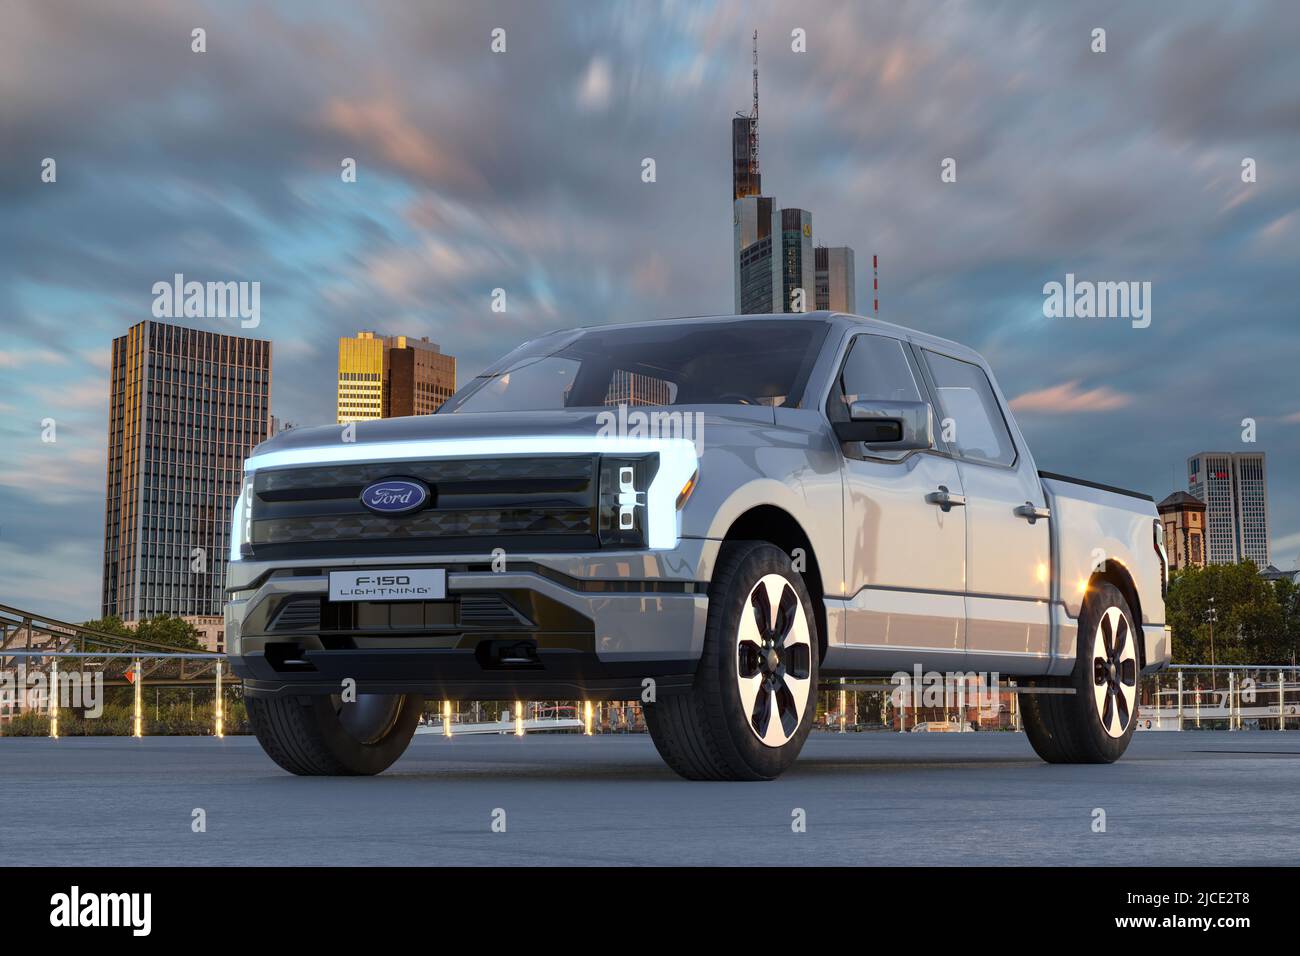 Ford F-150 Lightning Electric Truck Stock Photo